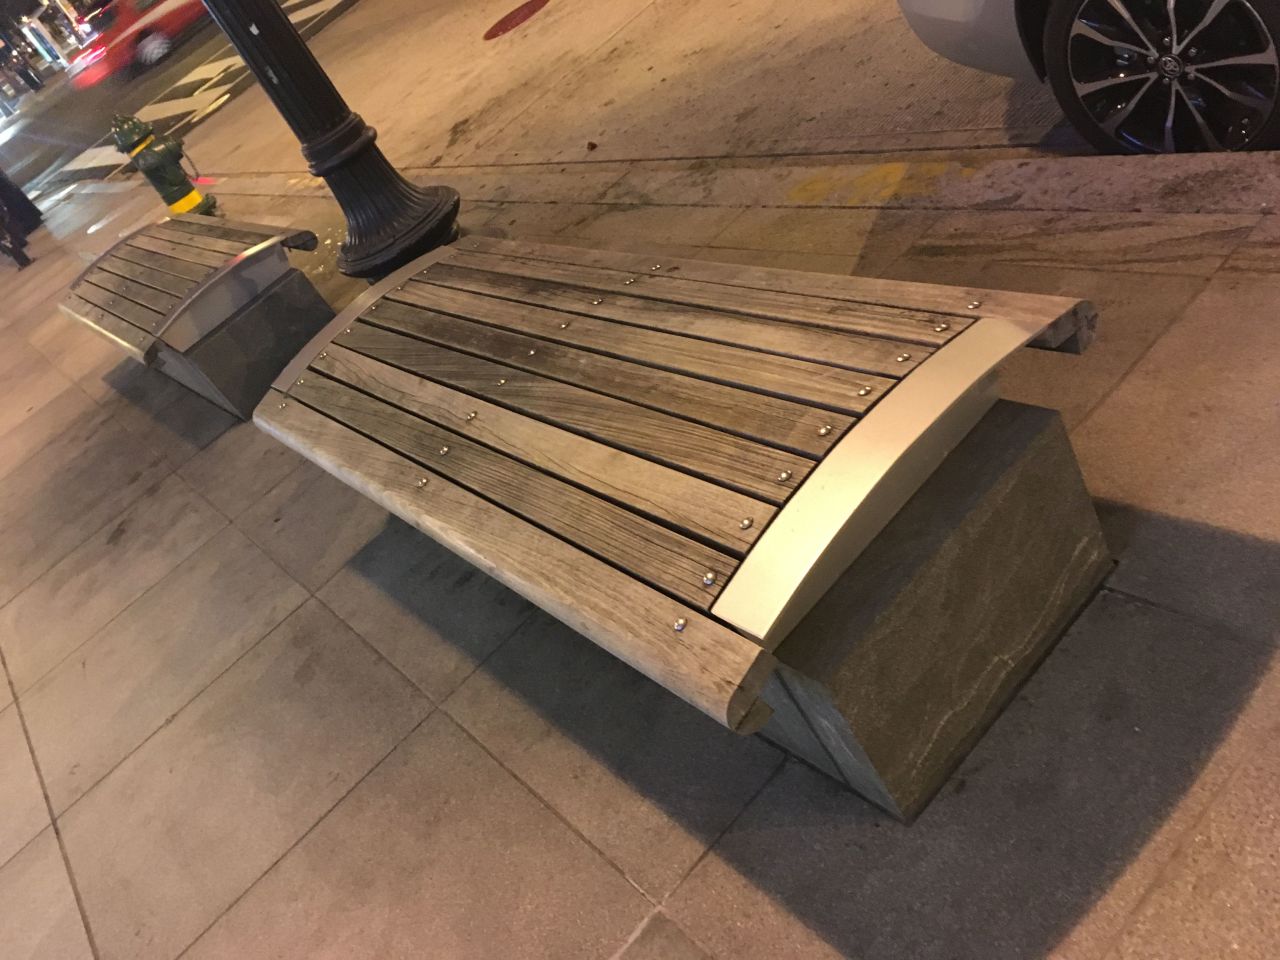 Sometimes hostile architecture is subtle. Instead of unwelcoming armrests, this wooden bench is designed with a curved base, to prevent users from lying down on it.